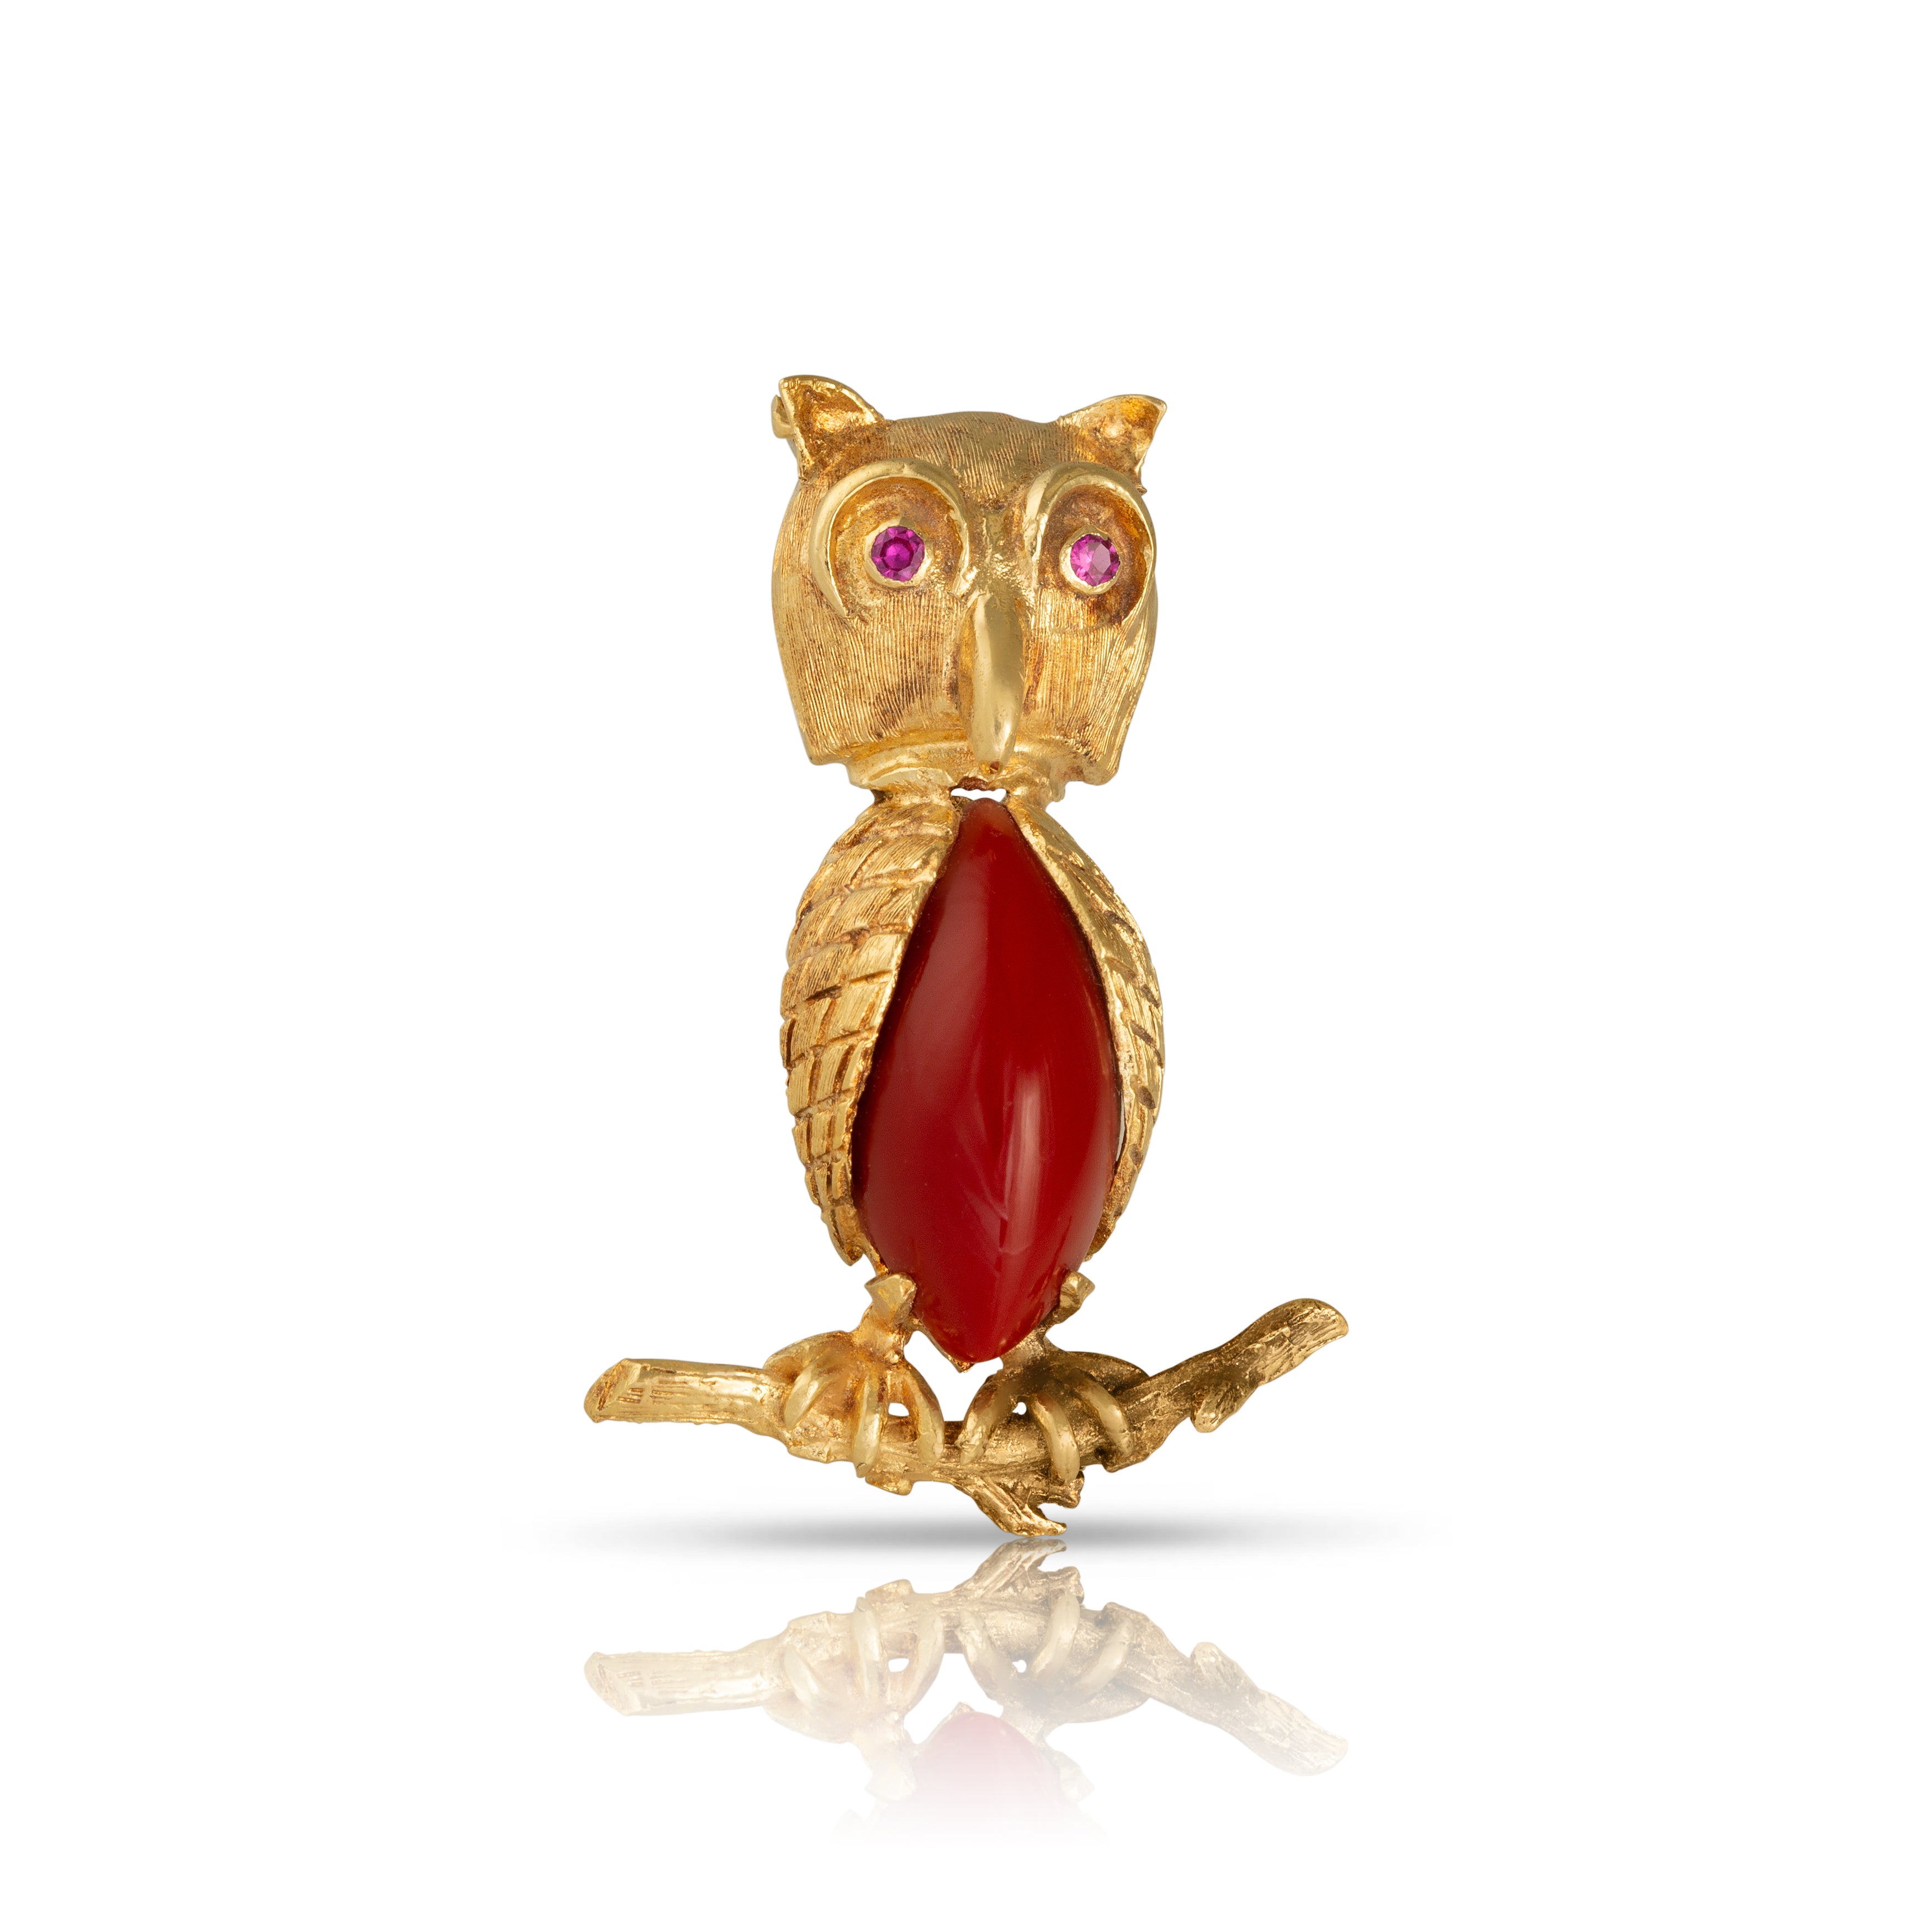  Vintage owl brooch in 18ct gold with red glass belly and ruby eyes.